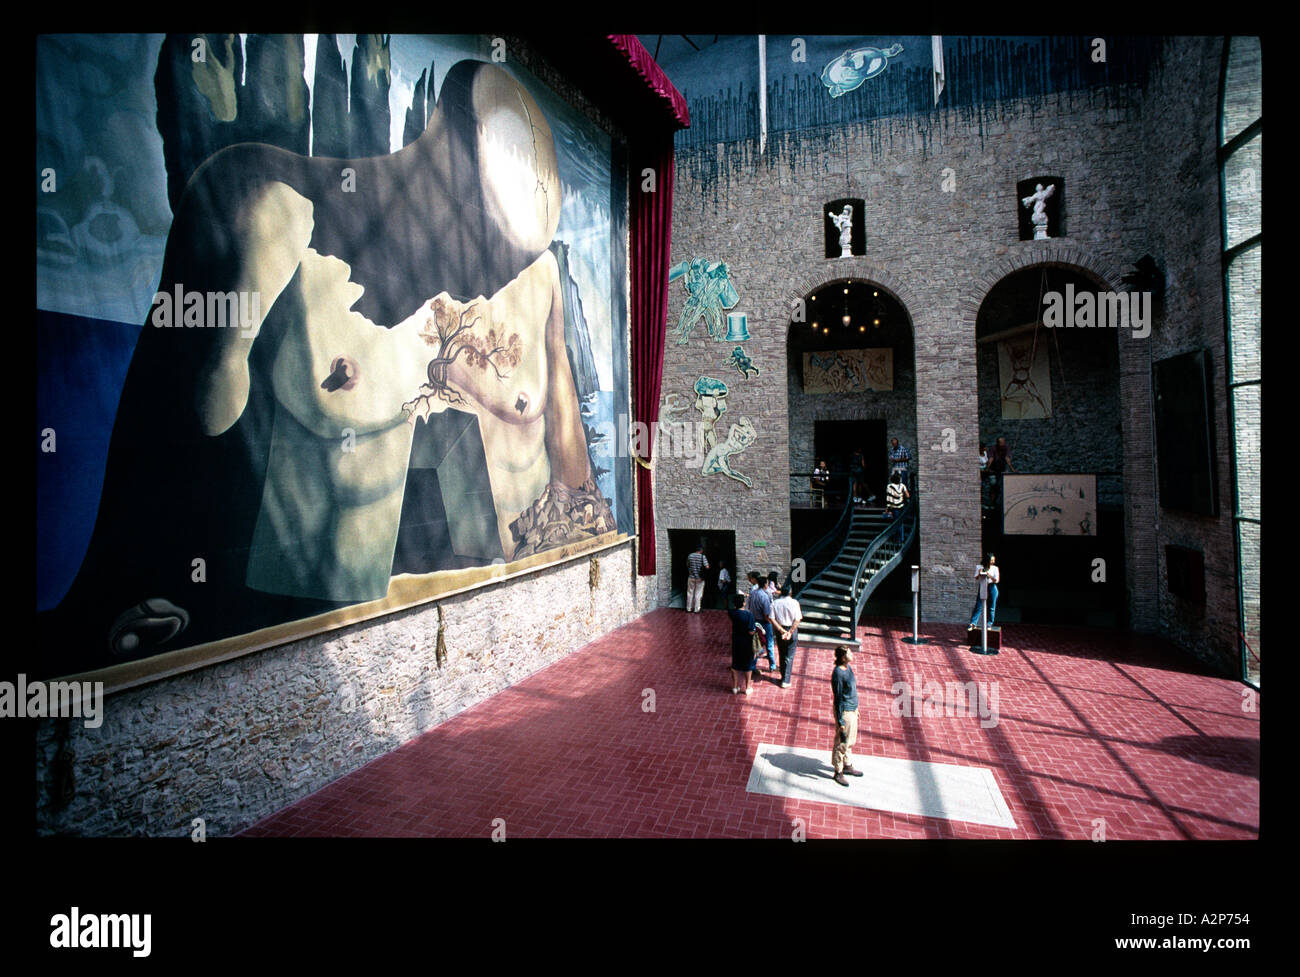 SPAIN DALI MUSEUM IN FIGEURES COPYRIGHT IMAGE BY Stock Photo